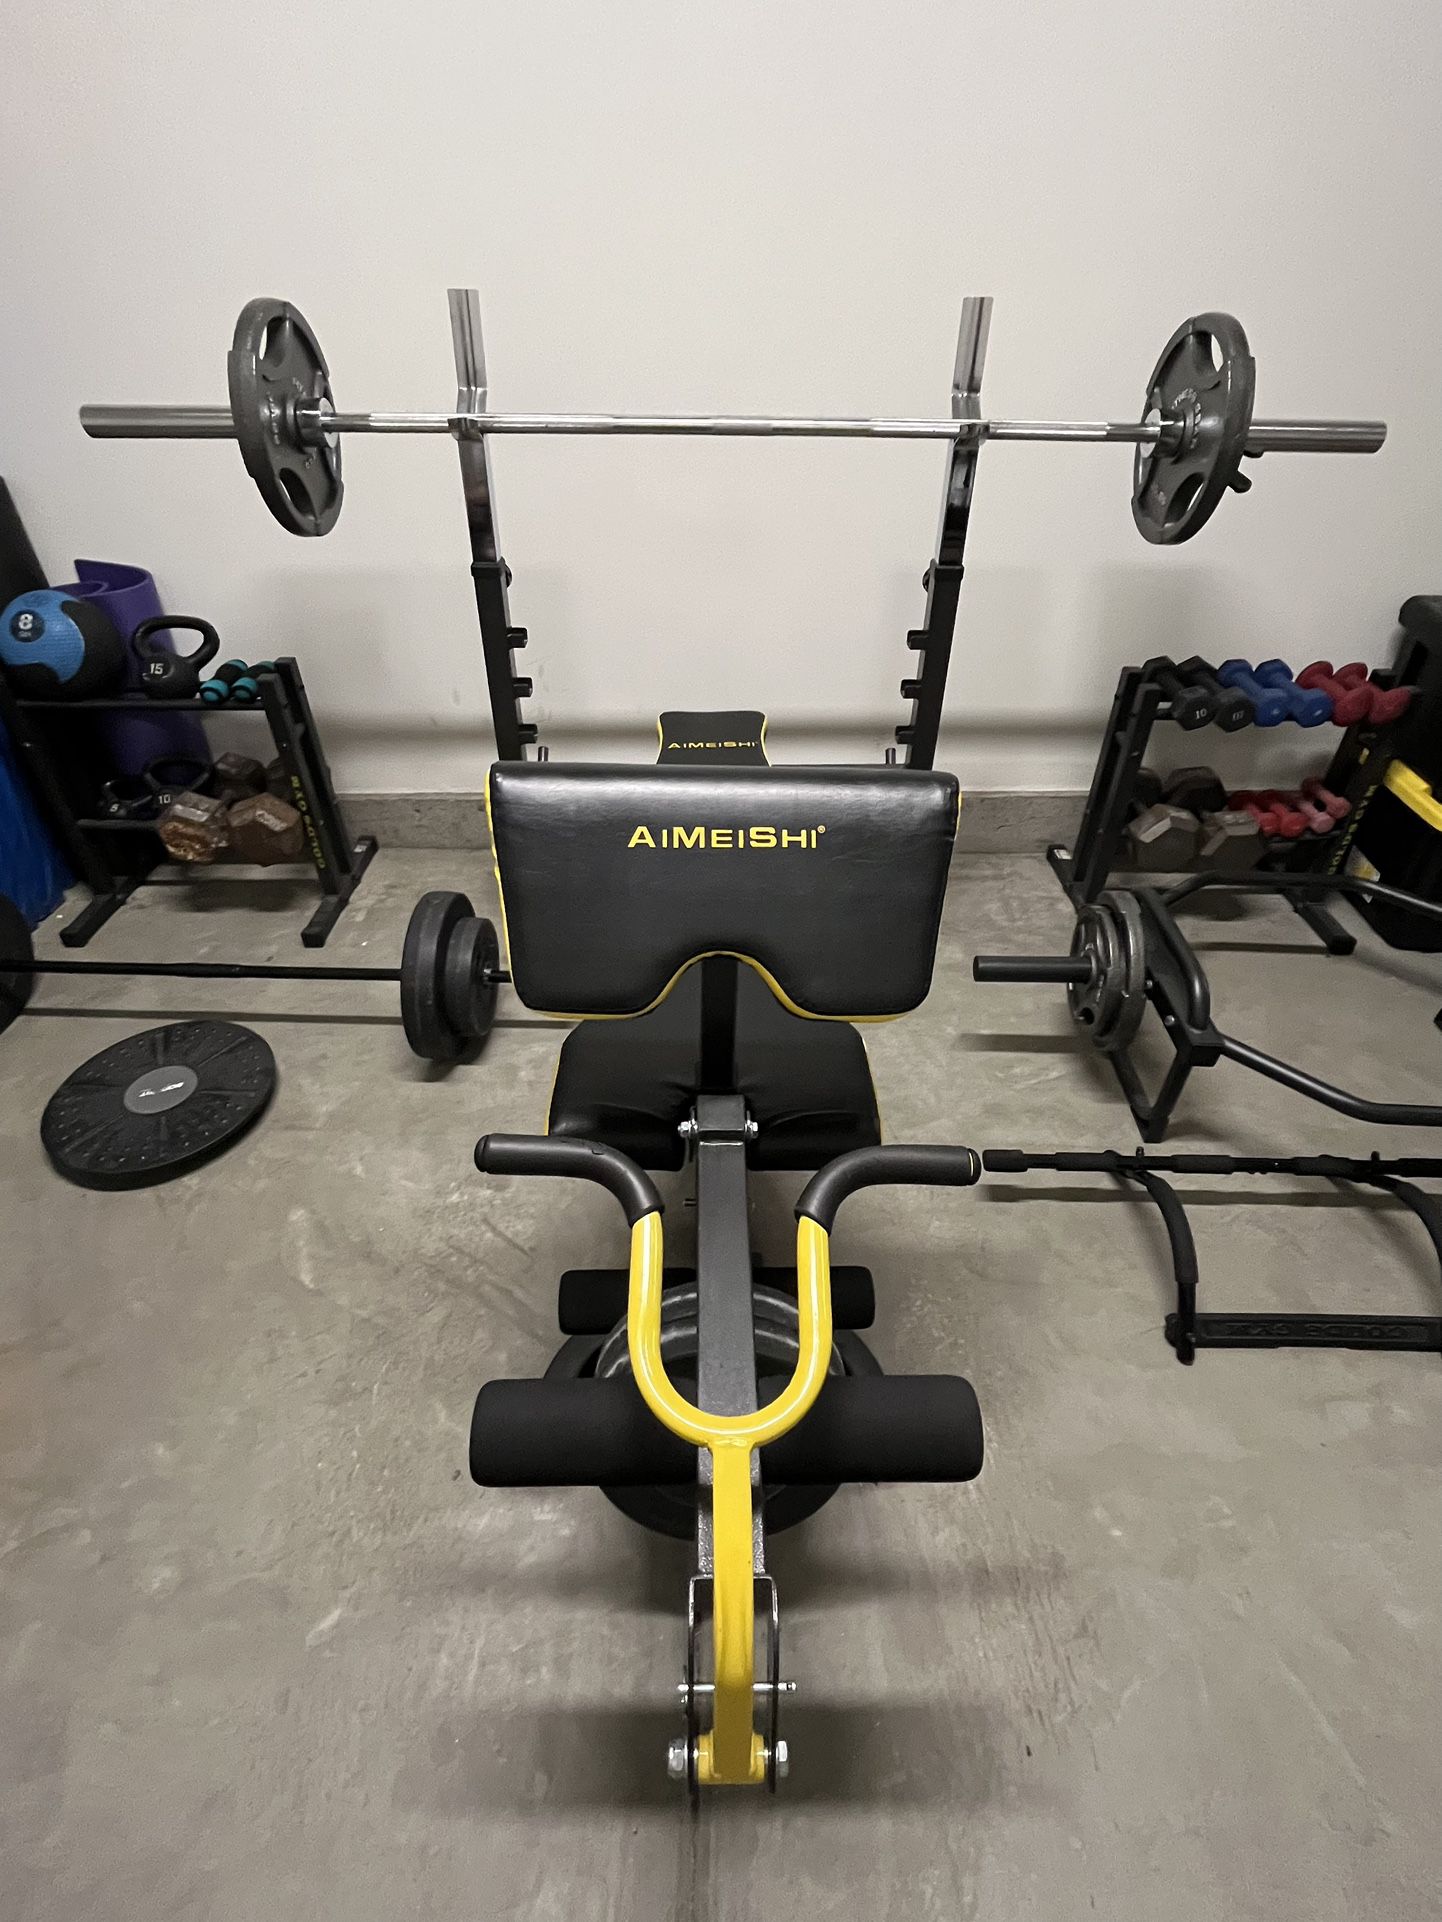 Gym equipment, Bench, Weight Set, Cyclace Exercise Bike (Selling All Together Only)